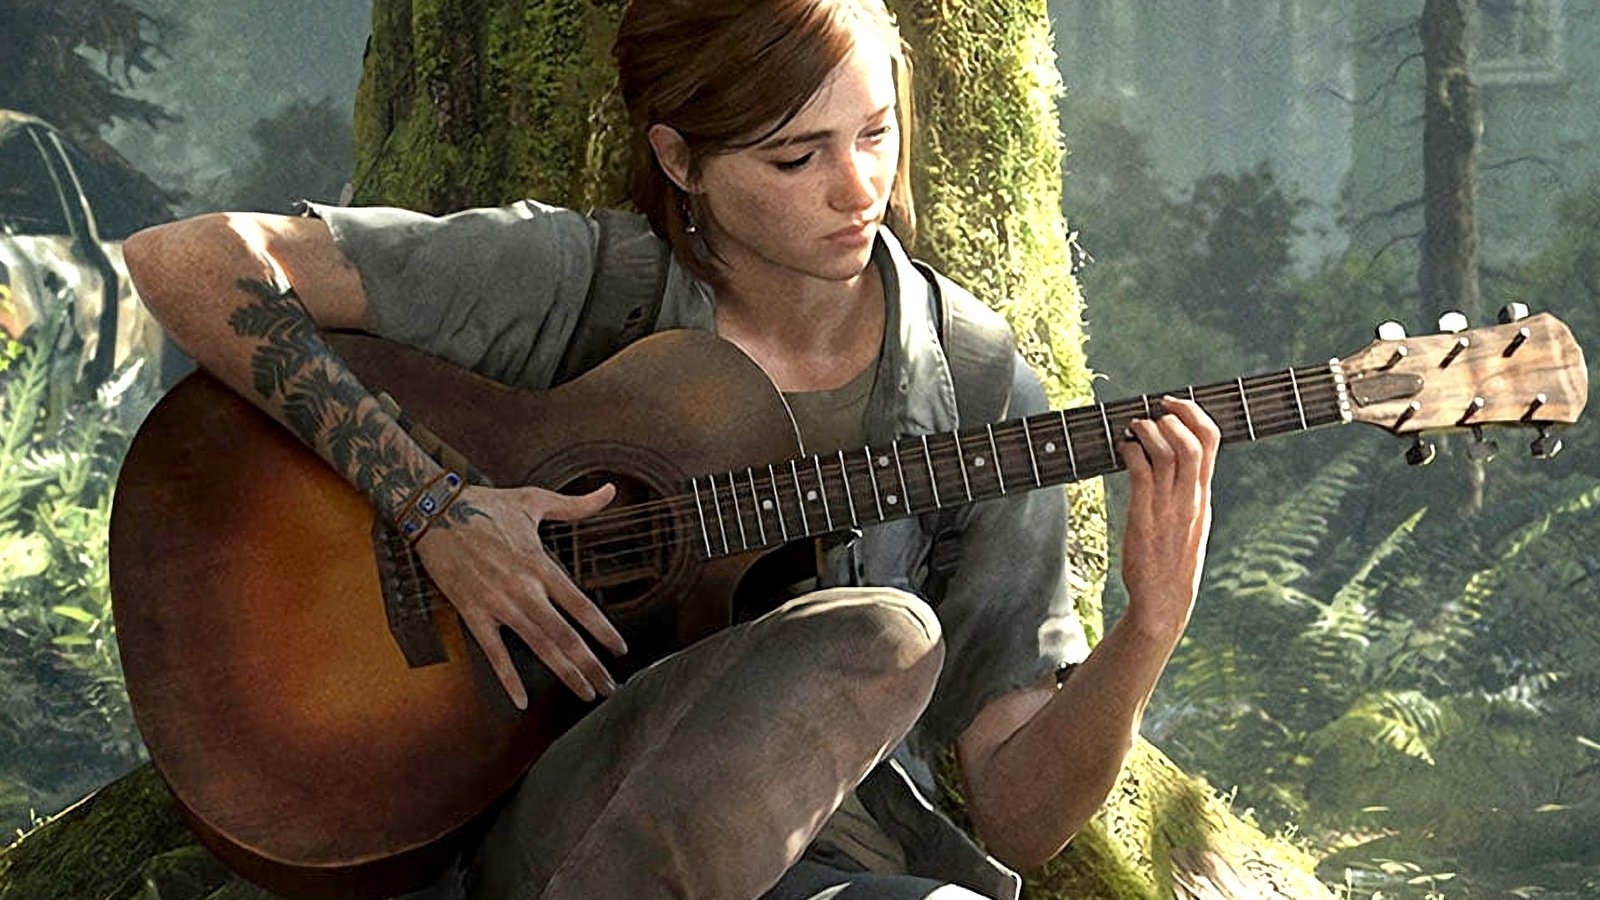 The Last of Us Part 2 has been upgraded for PS5 we've tested it